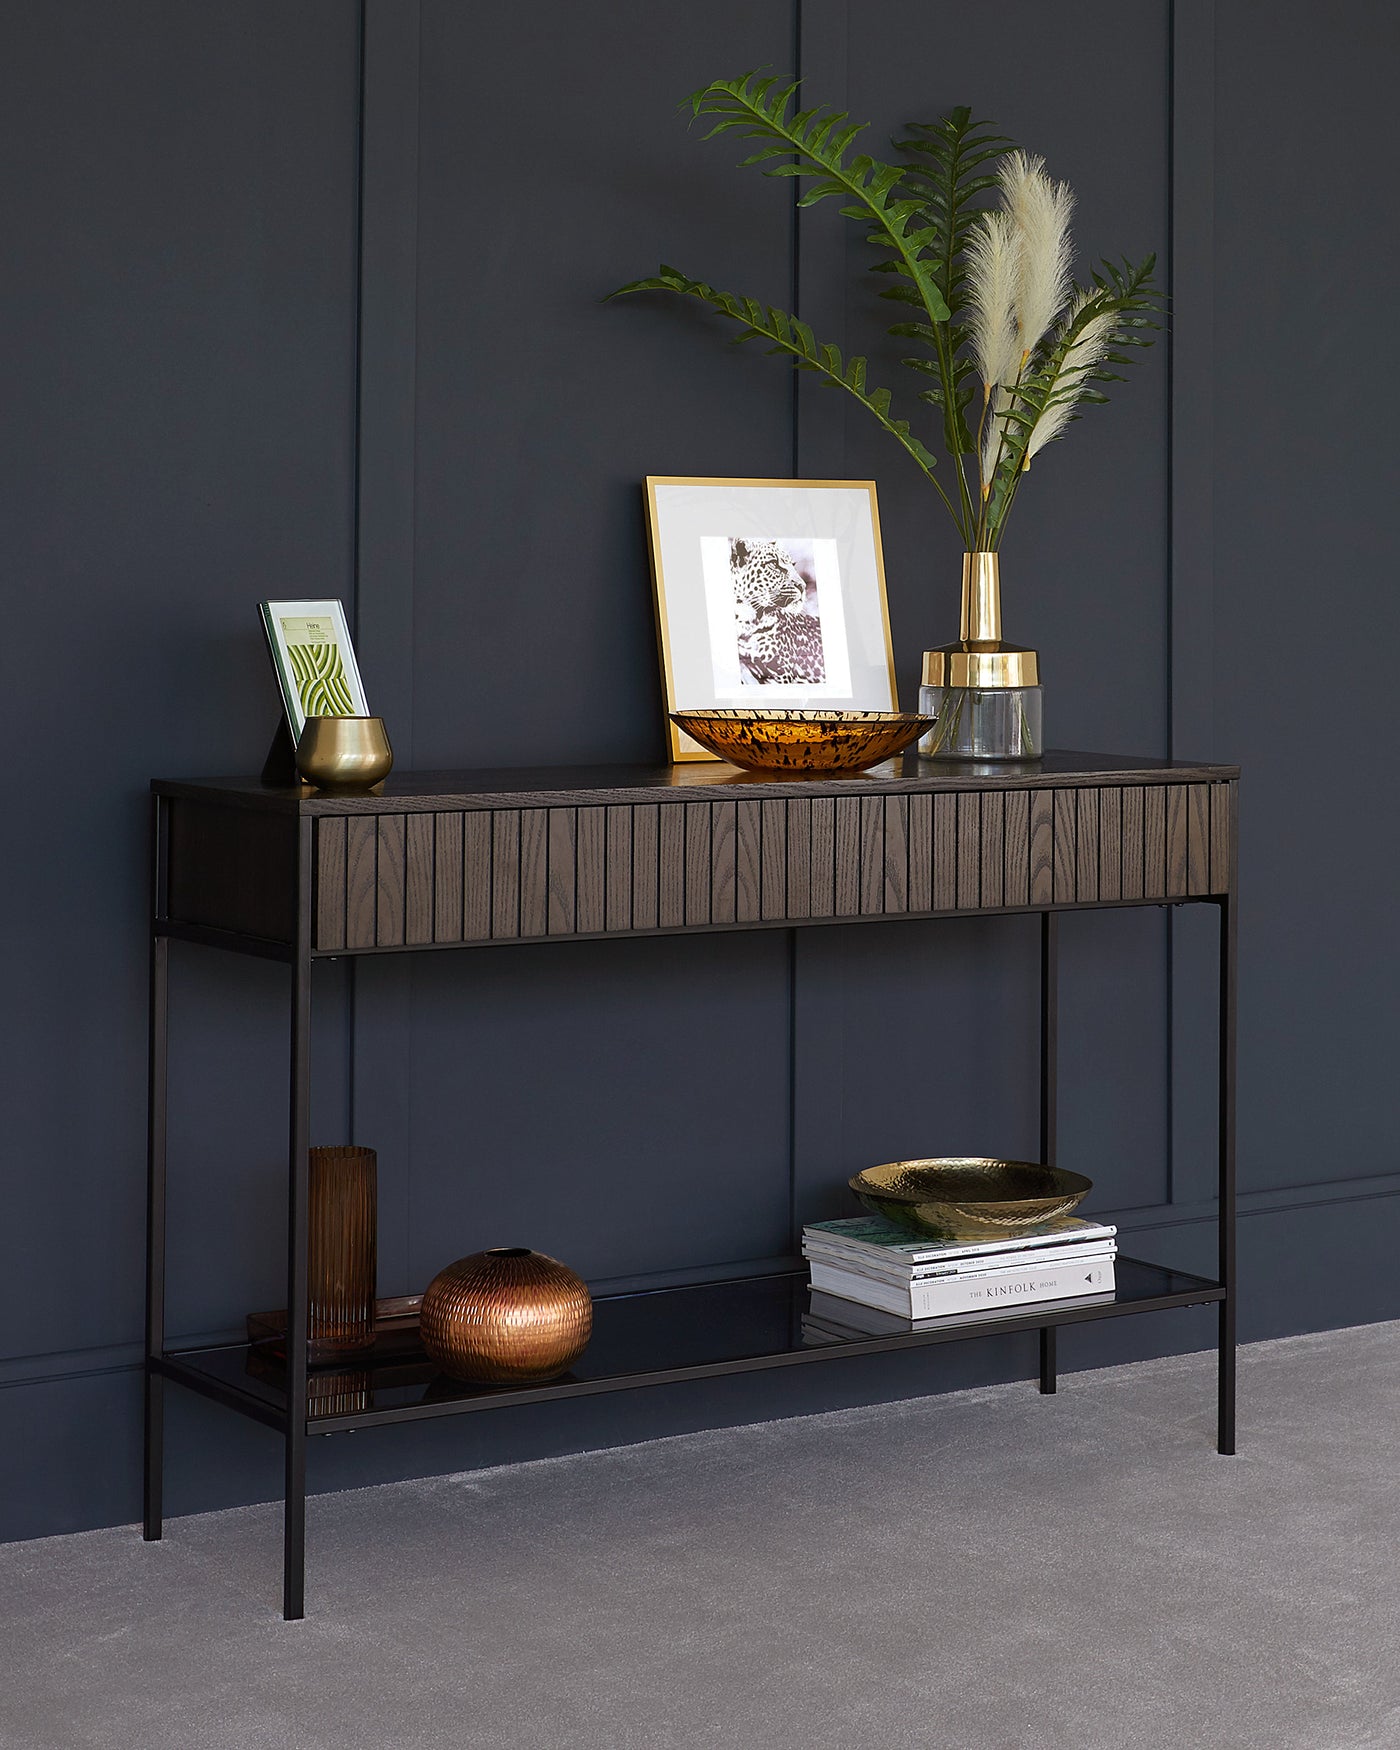 Slim, modern console table with dark wood finish and textured front, featuring two tiers with a lower metal shelf. The design includes straight, minimalist lines and a simple, elegant frame.